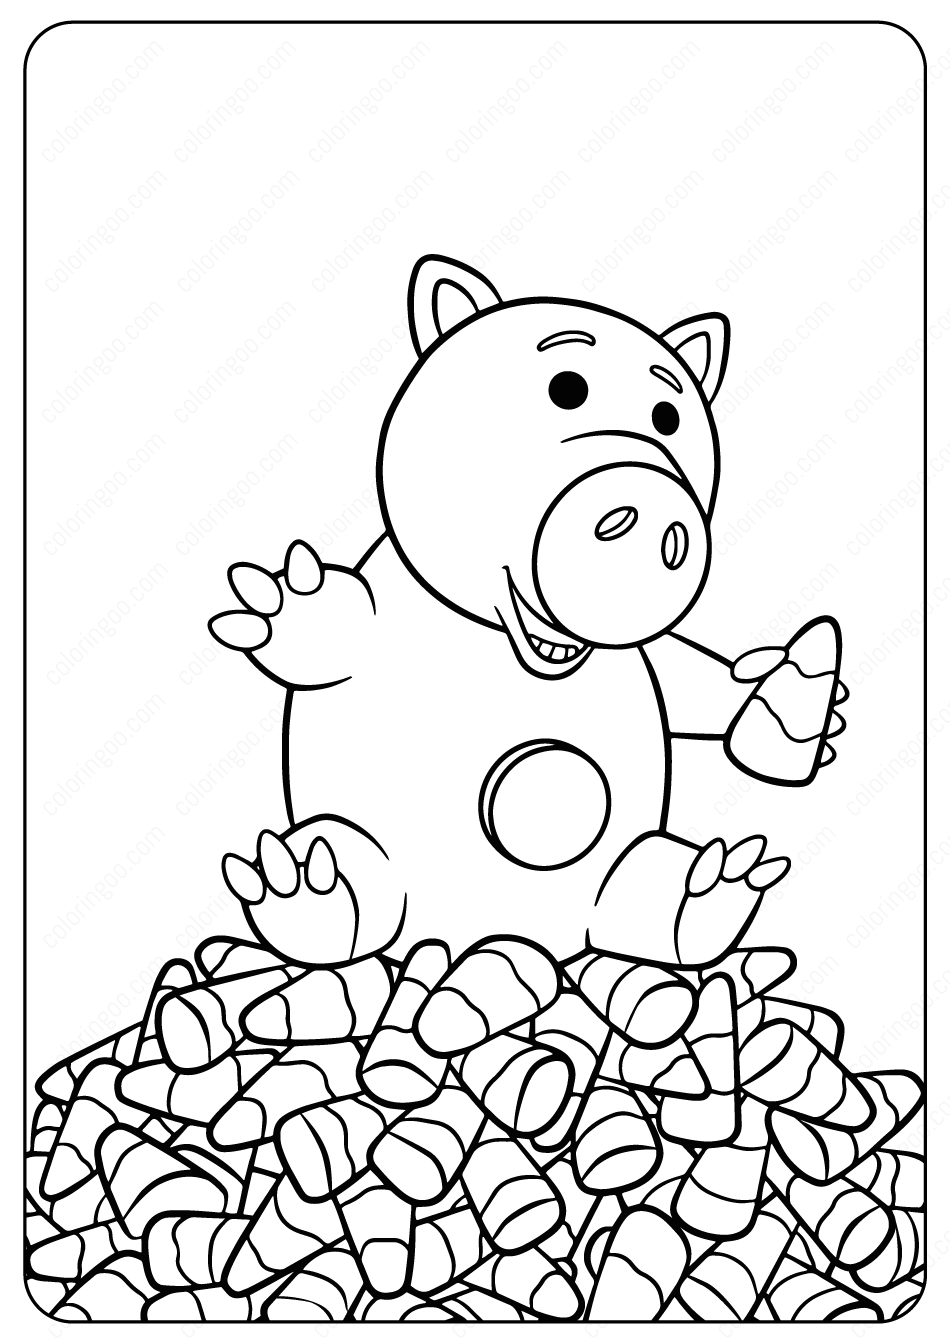 disney hamm halloween coloring pages